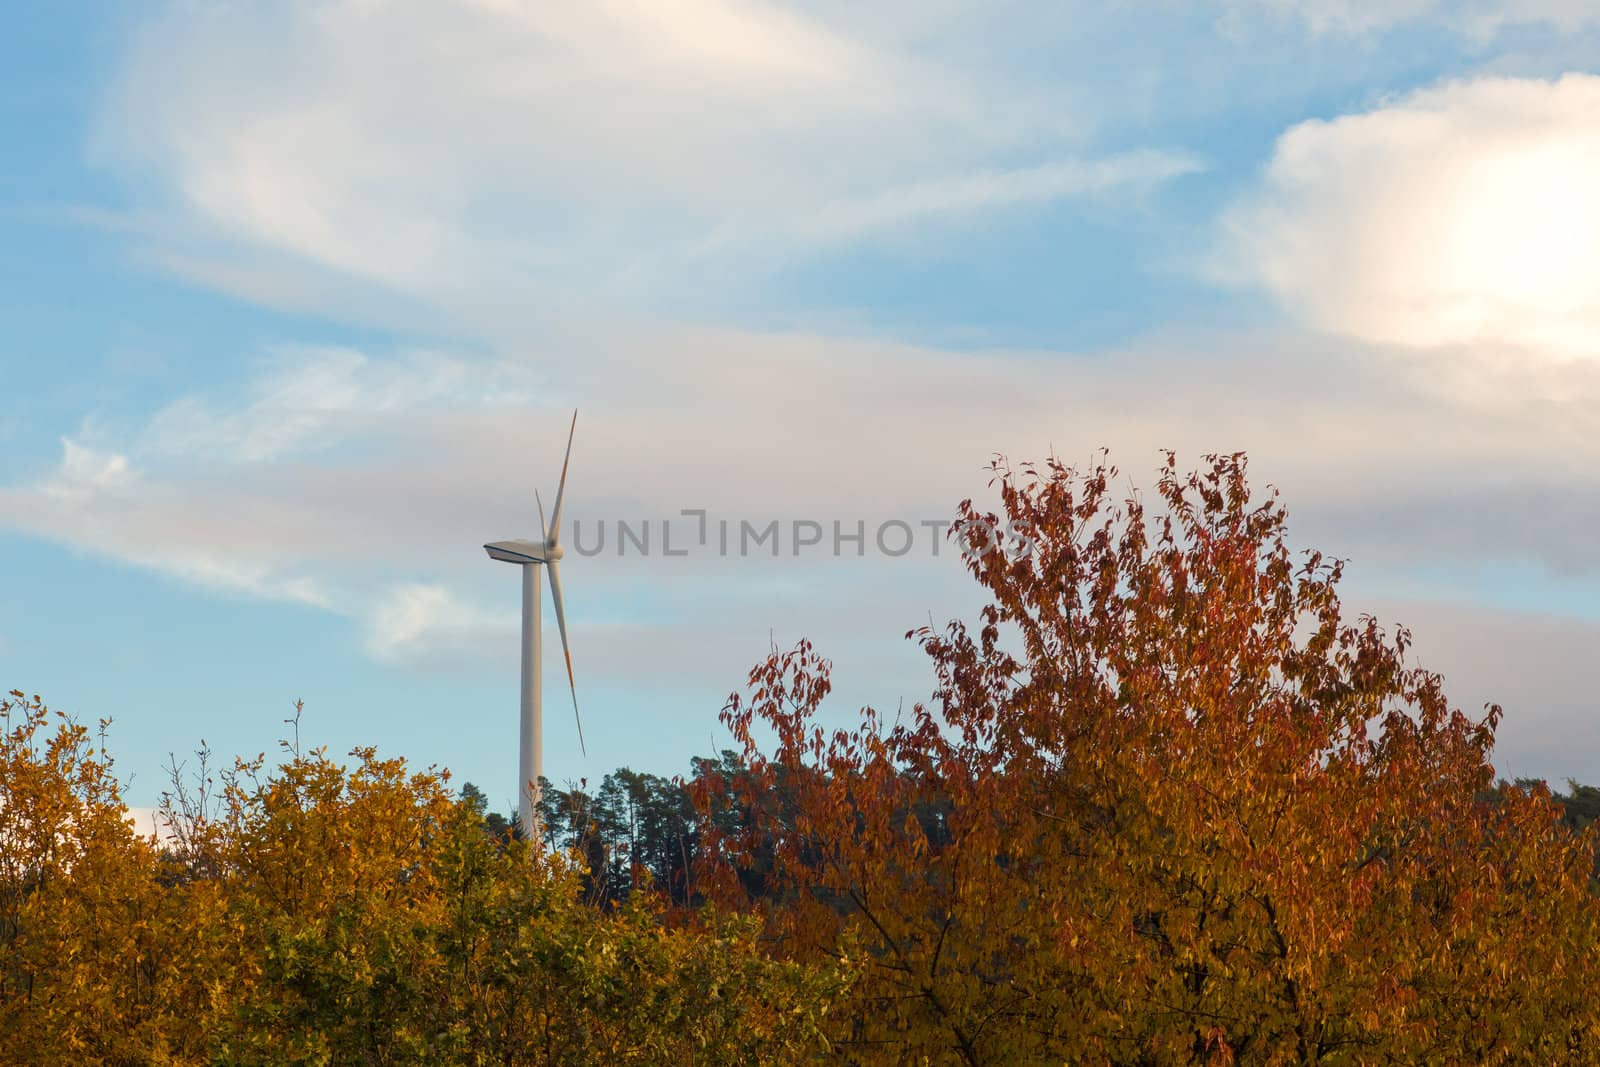 Green energy from wind: large wind turbine high above fall-colored tree tops.